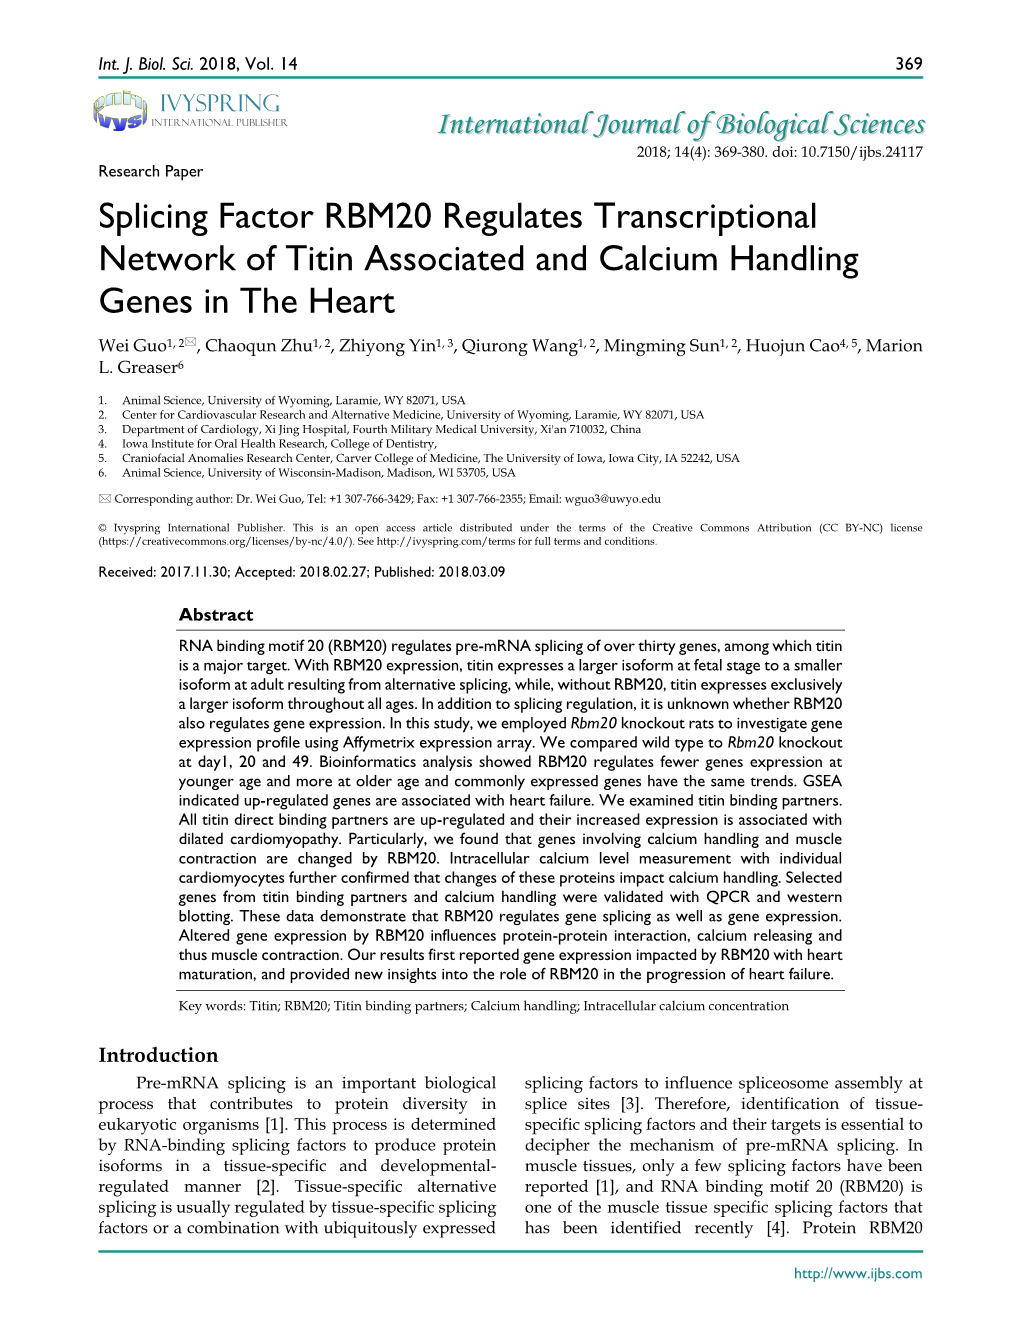 Splicing Factor RBM20 Regulates Transcriptional Network of Titin Associated and Calcium Handling Genes in the Heart